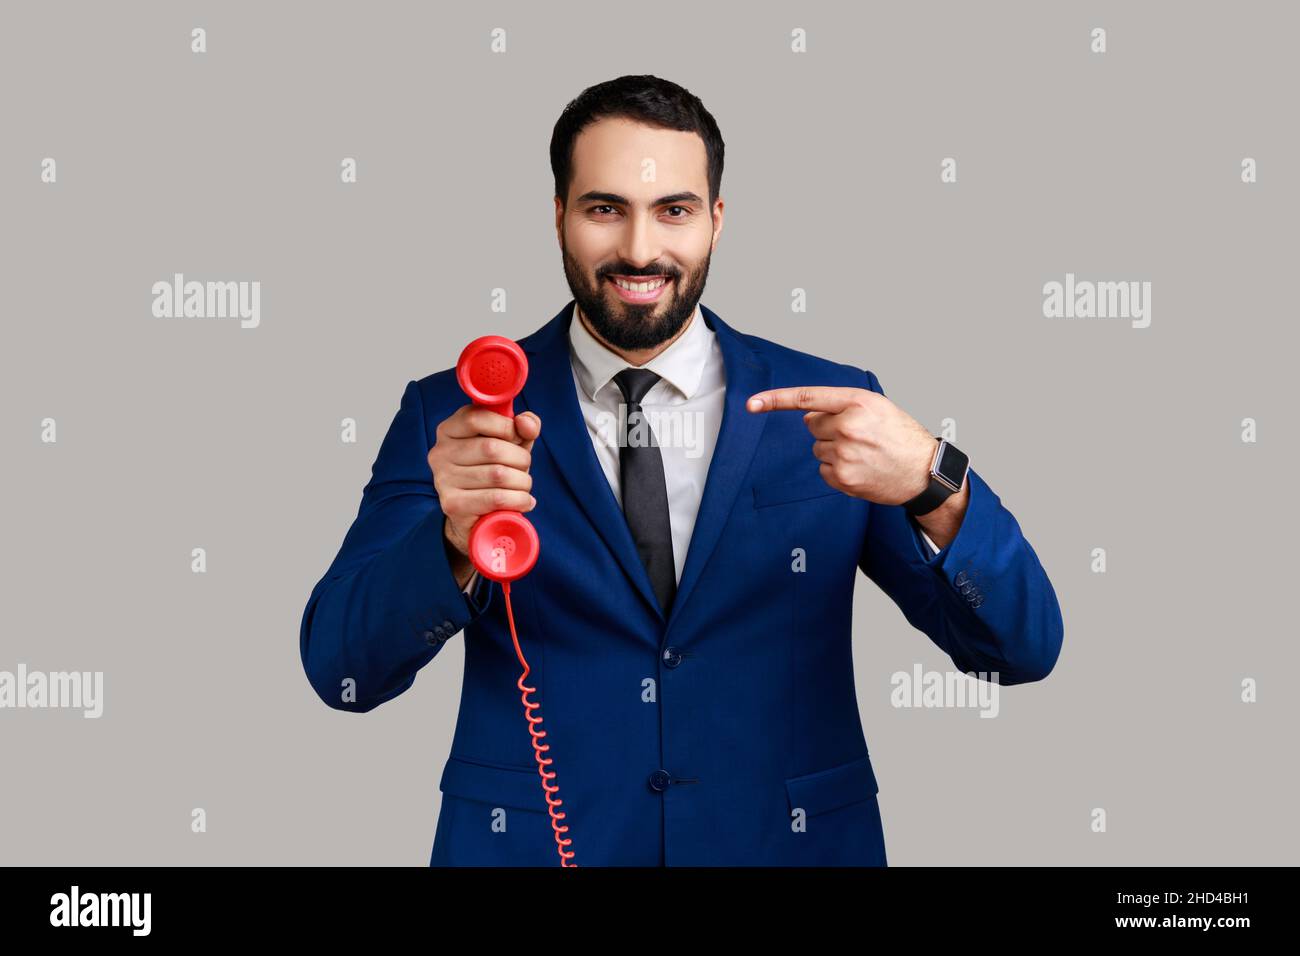 Bearded man pointing finger at handset of red vintage landline phone, interested in retro devices, answering calls, wearing official style suit. Indoor studio shot isolated on gray background. Stock Photo